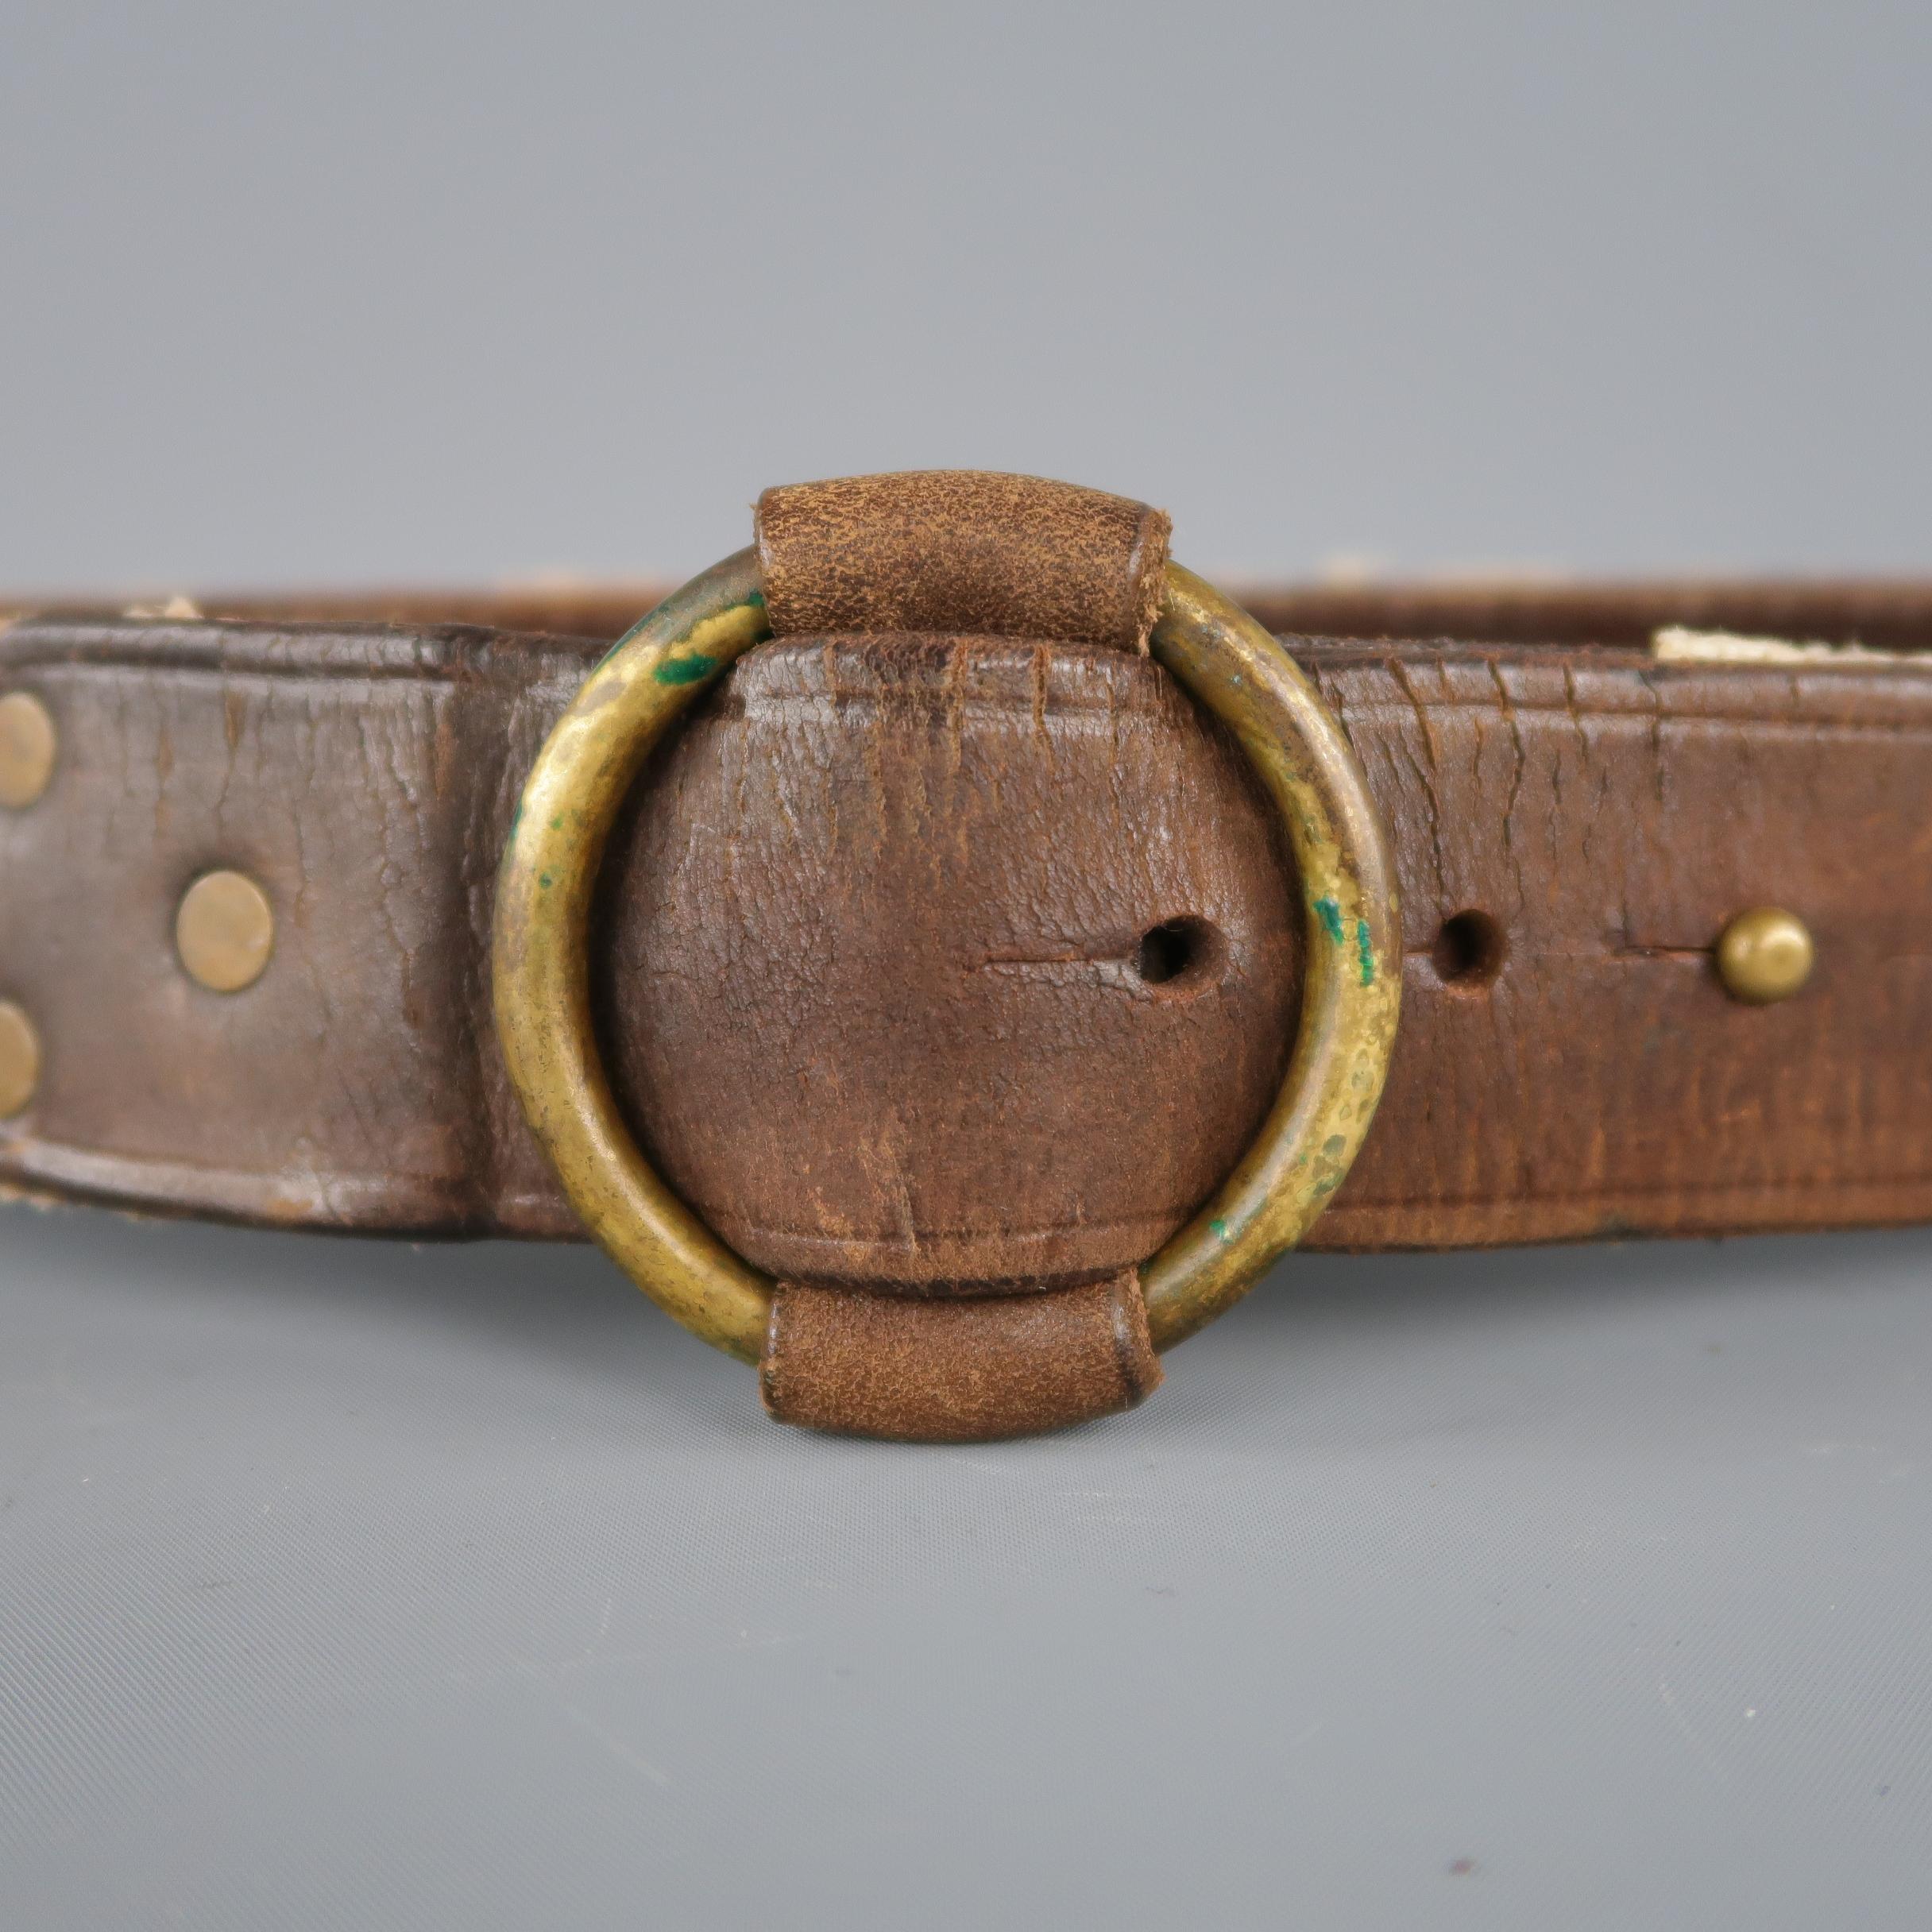 RRL by RALPH LAUREN belt features a dual tone in brown leather and beige rope materials, with a anchor print and an antiqued gold tone aged metal circular buckle . Retail price: 350.00. 
 
Excellent Pre-Owned Condition.
Marked 10/100.
 
Length: 45 